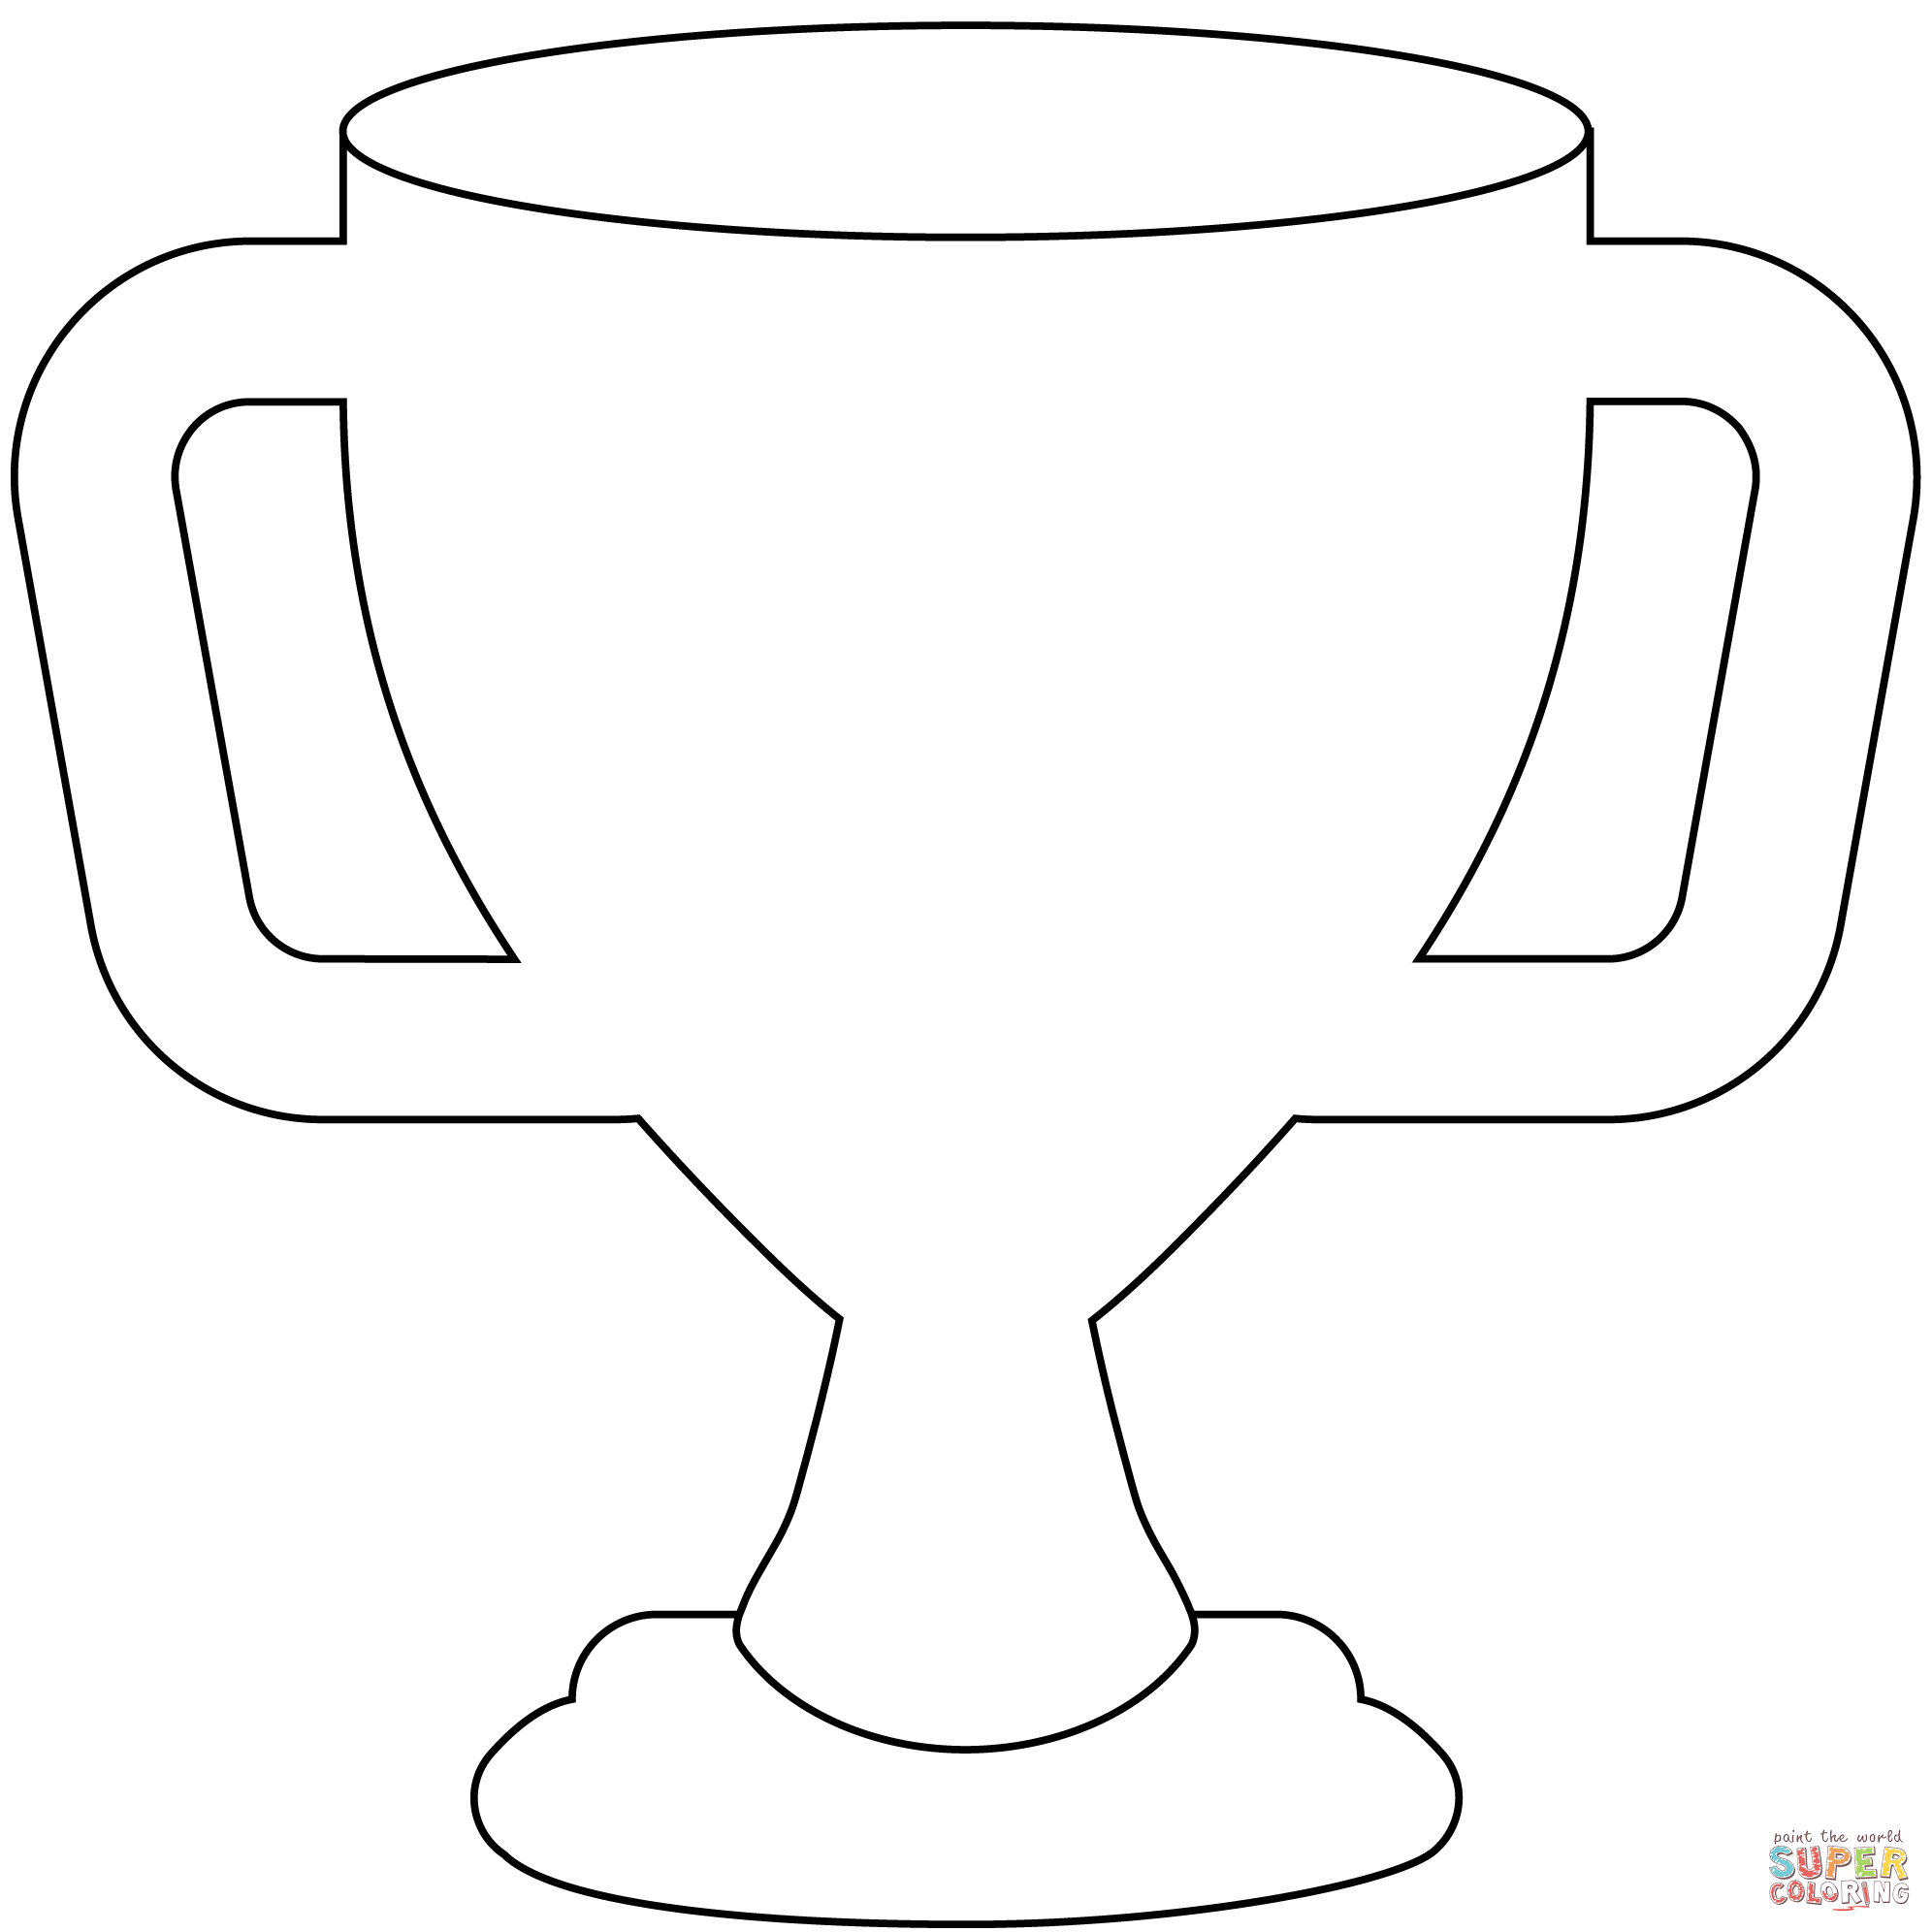 Trophy emoji coloring page free printable coloring pages